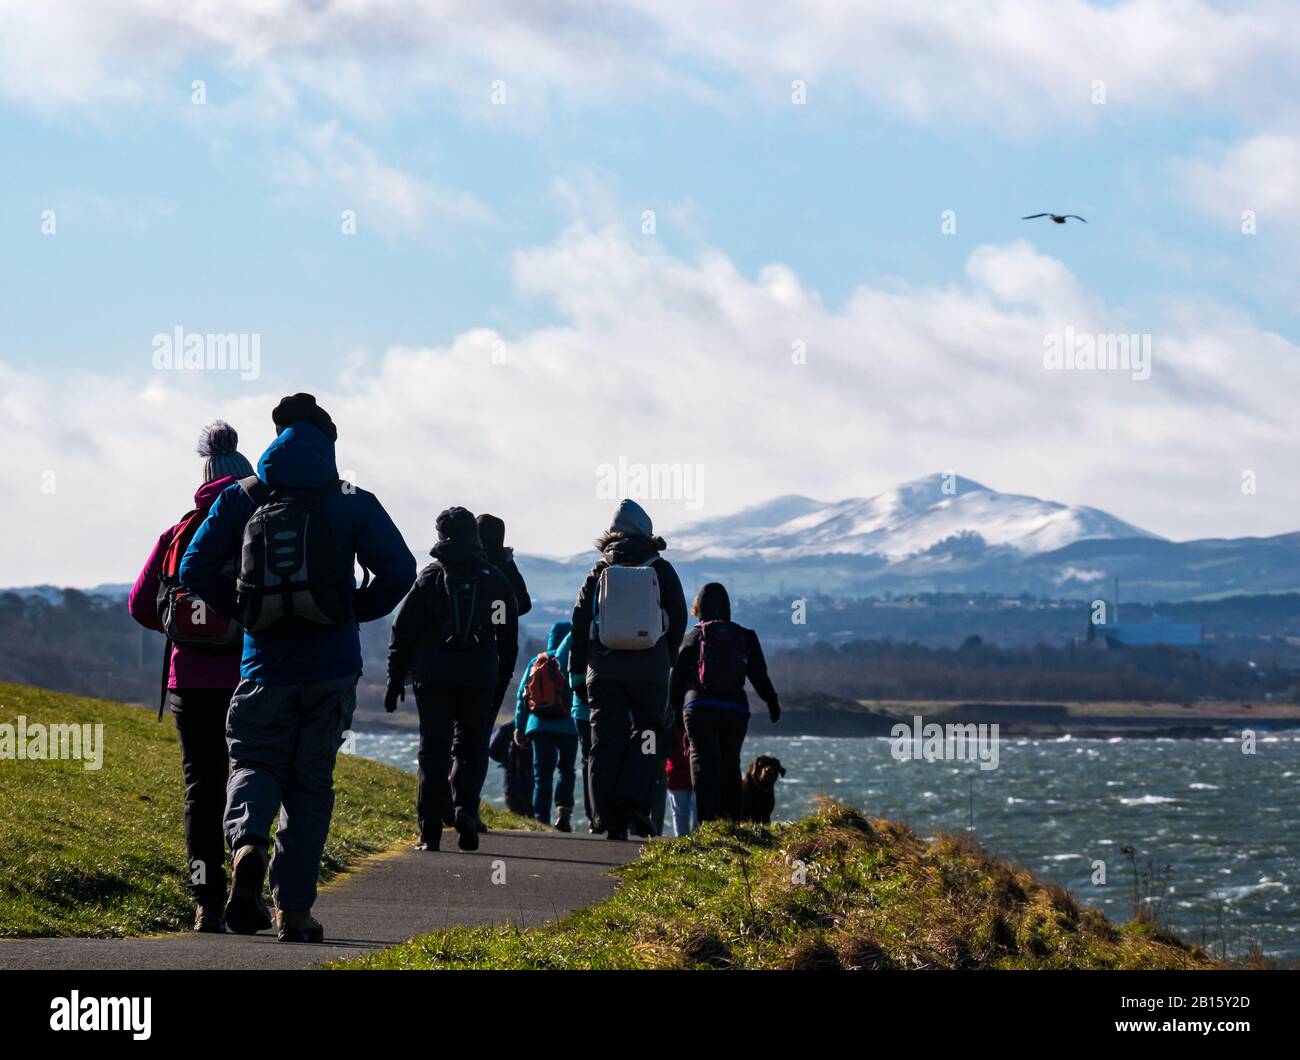 Firth of Forth, East Lothian, Scotland, United Kingdom, 23rd February 2020. UK Weather: Very strong wind on the coastline with sunshine. The wind creates white caps in the sea and big waves against the shore. A group of walkers on the John Muir Way with snow on the Pentland Hills in the distance Stock Photo